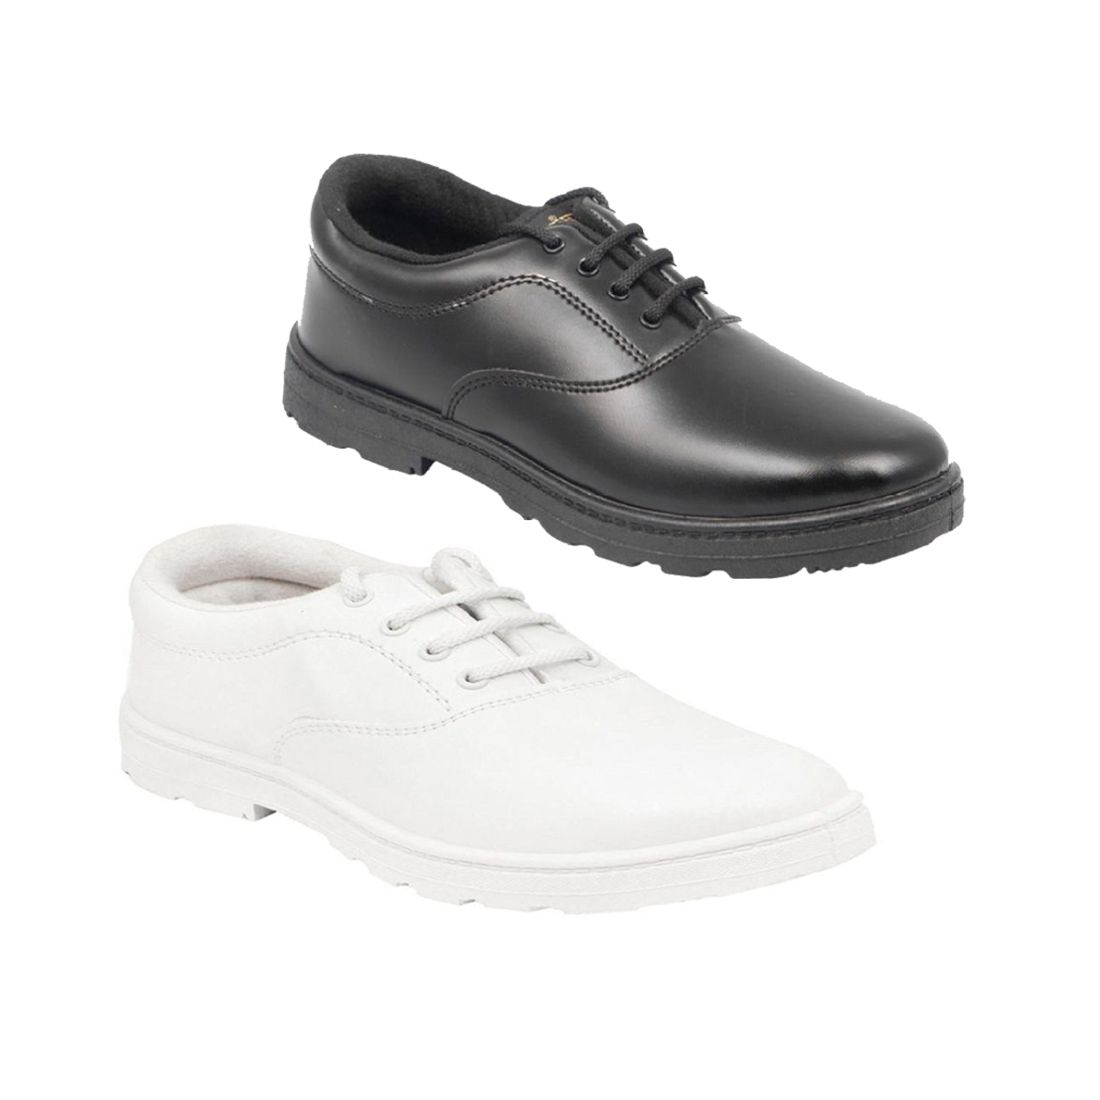 snapdeal school shoes